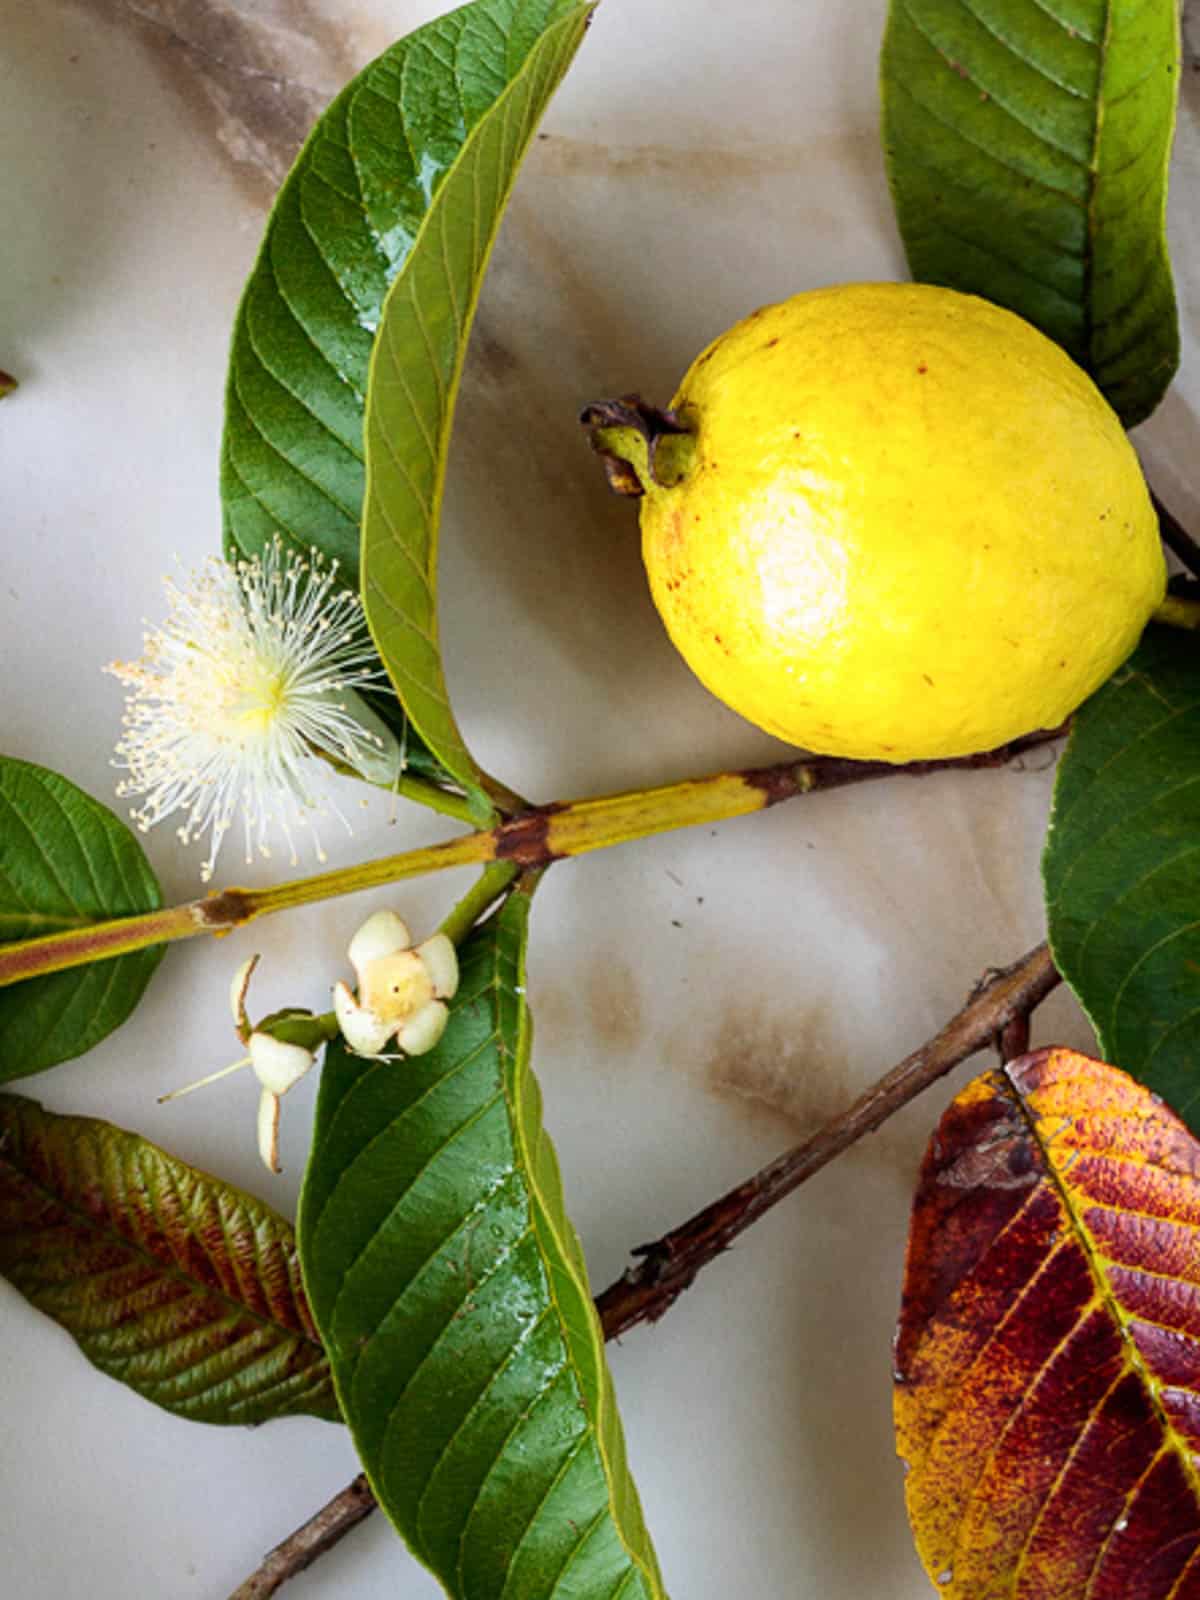 Bright yellow guava fruit on a branch with feathery white flower.